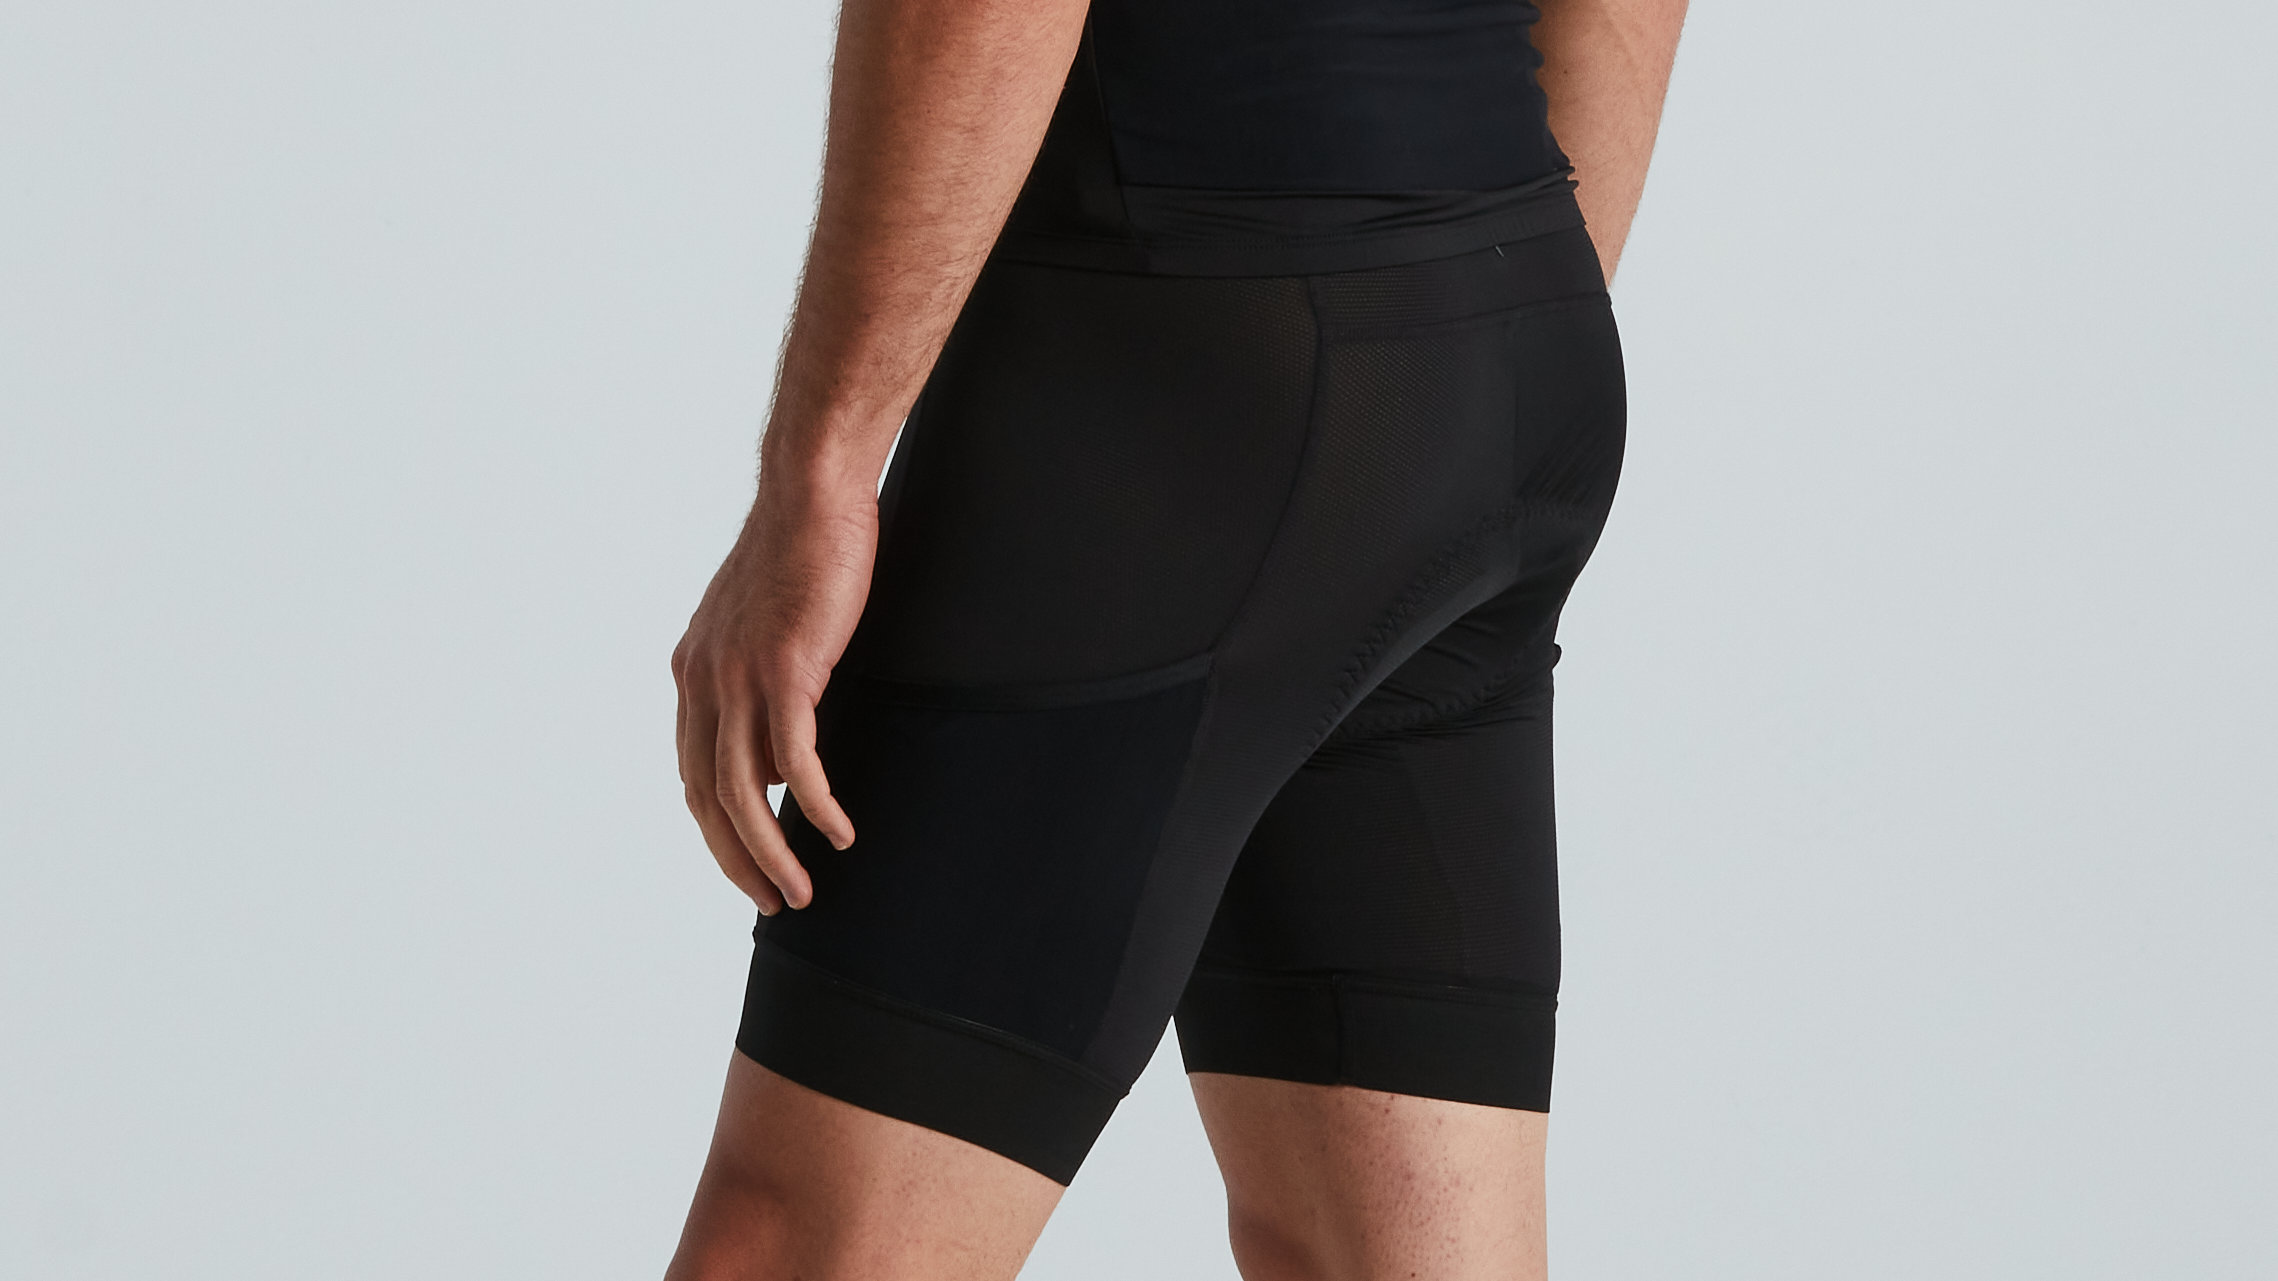 swat shorts specialized